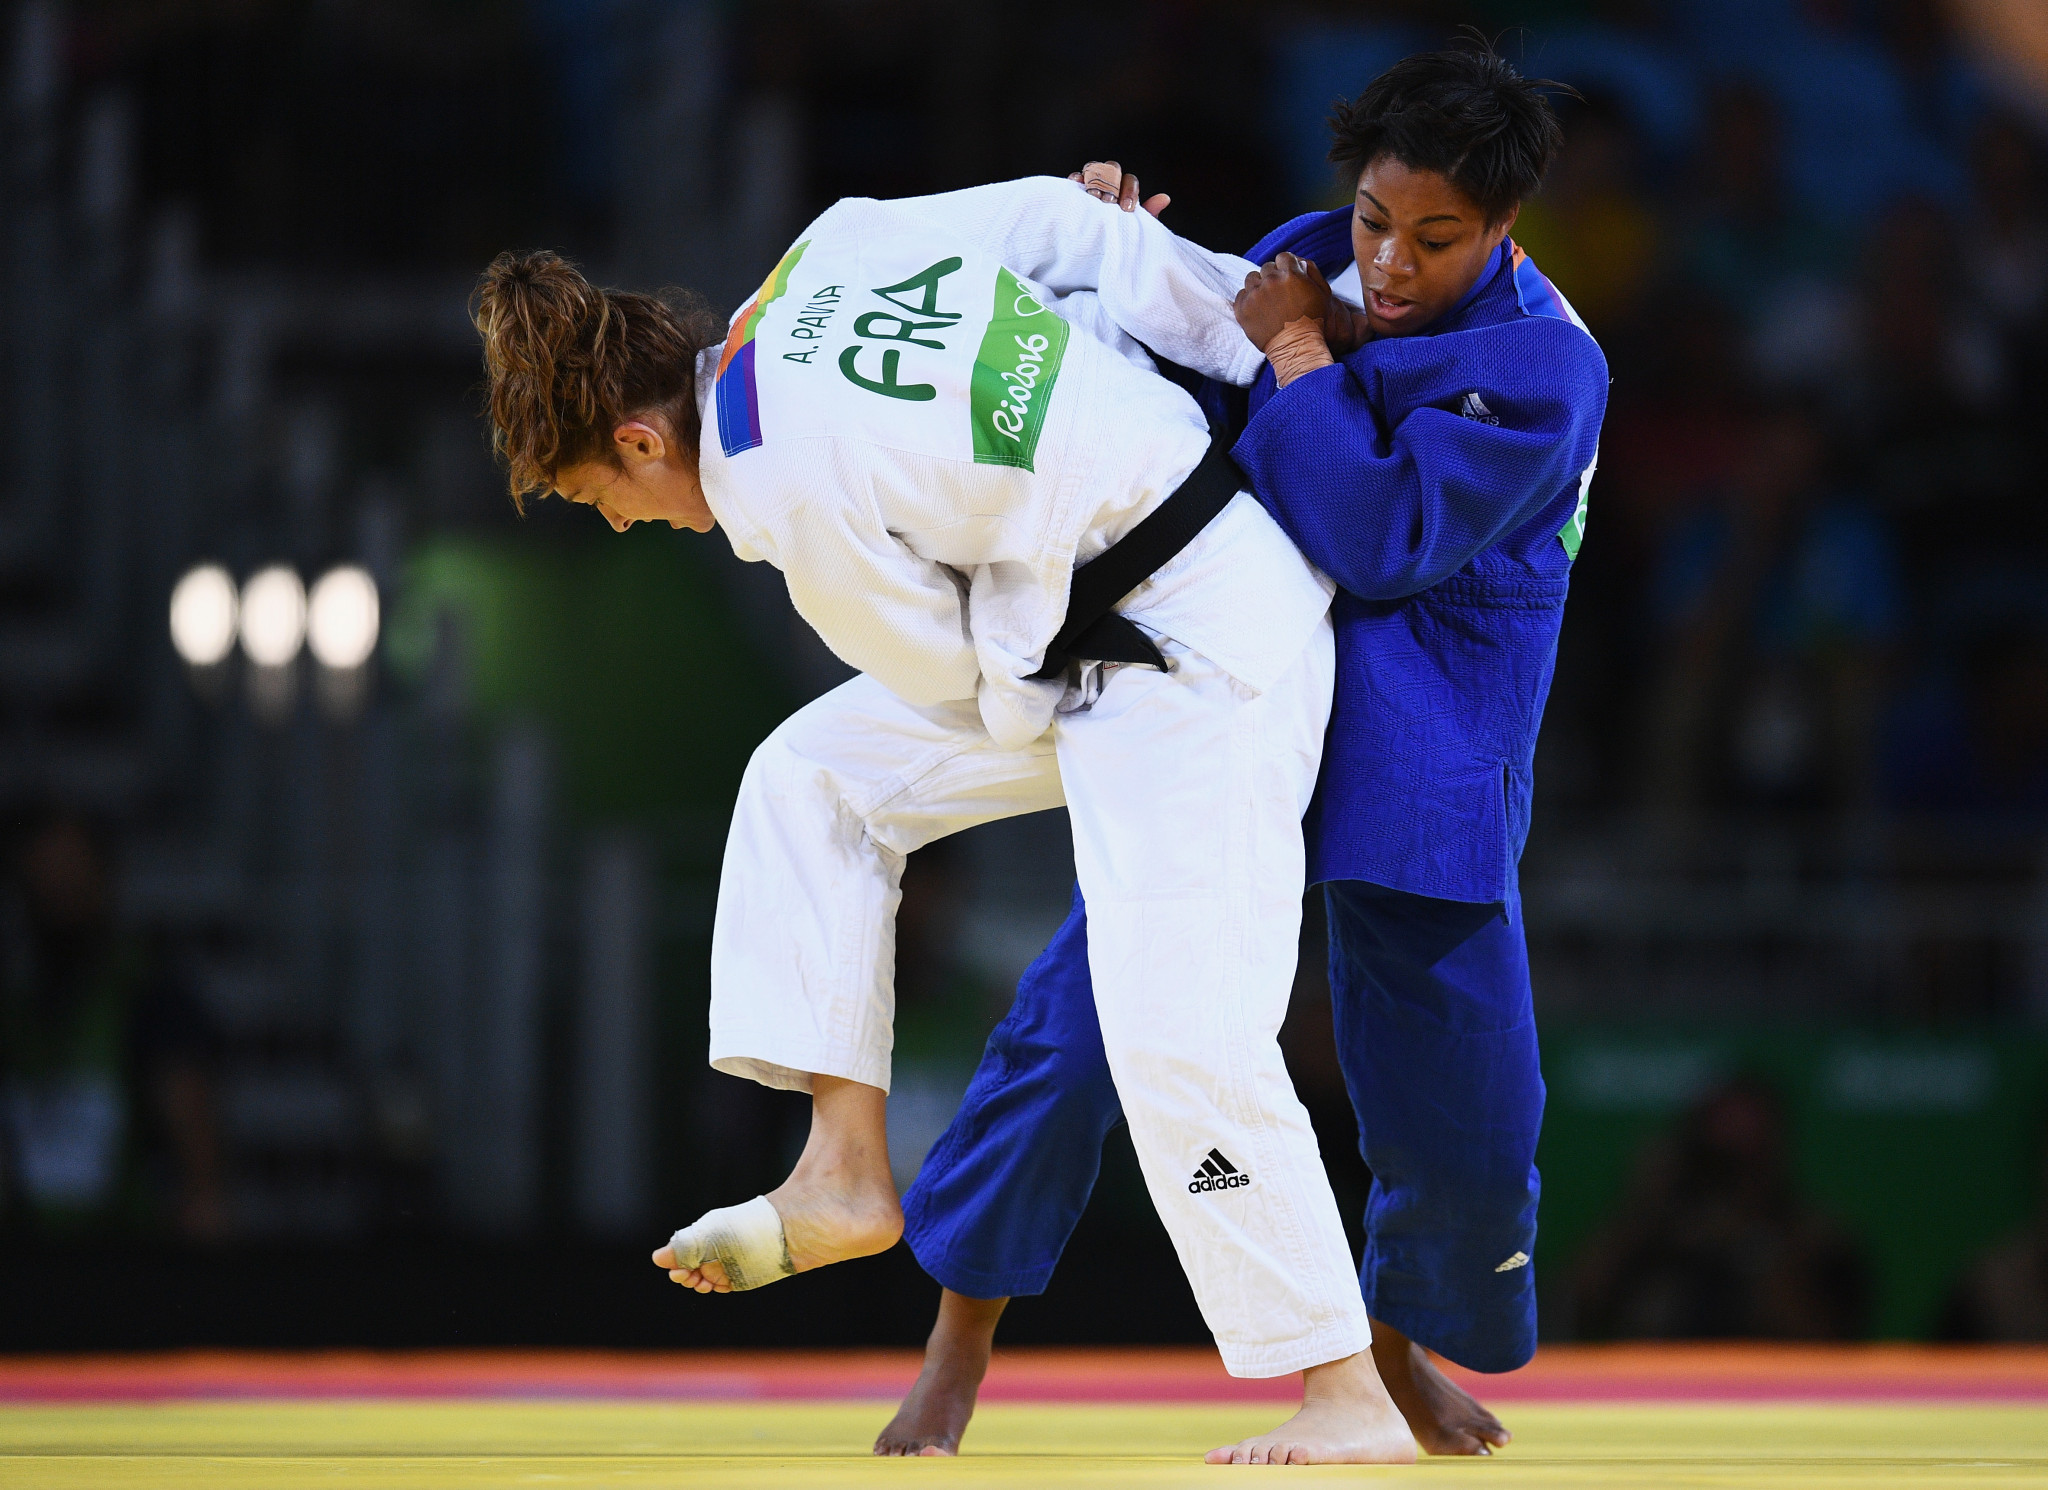 Fresh from her silver medal at the IJF World Championships, Great Britain's Nekoda Smythe-Davis will be competing in Cancun ©Getty Images